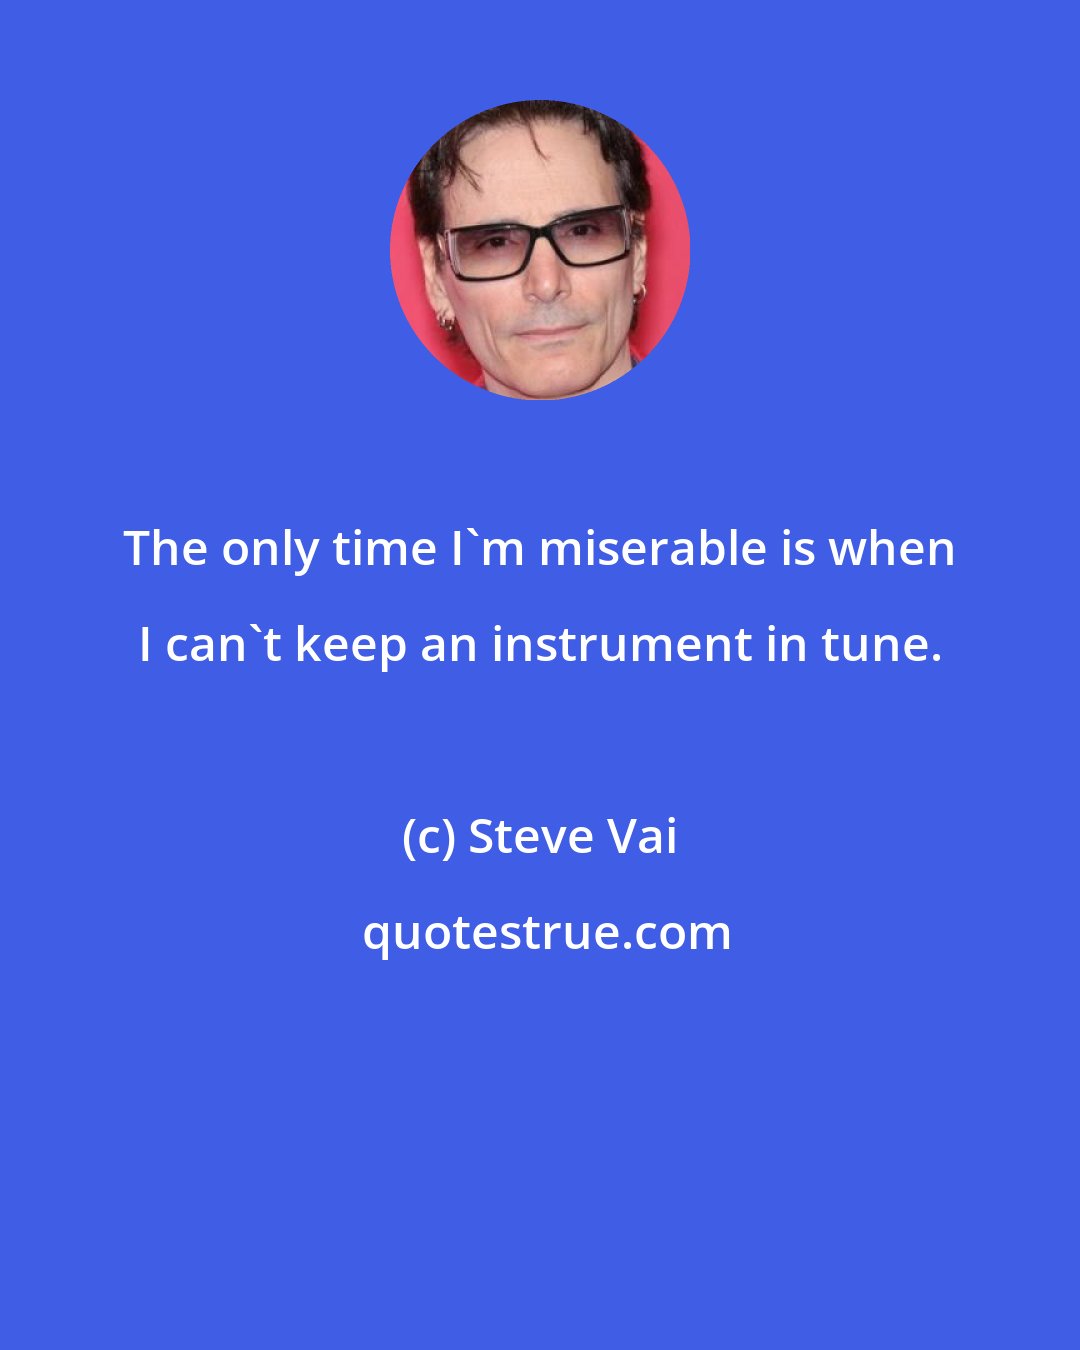 Steve Vai: The only time I'm miserable is when I can't keep an instrument in tune.